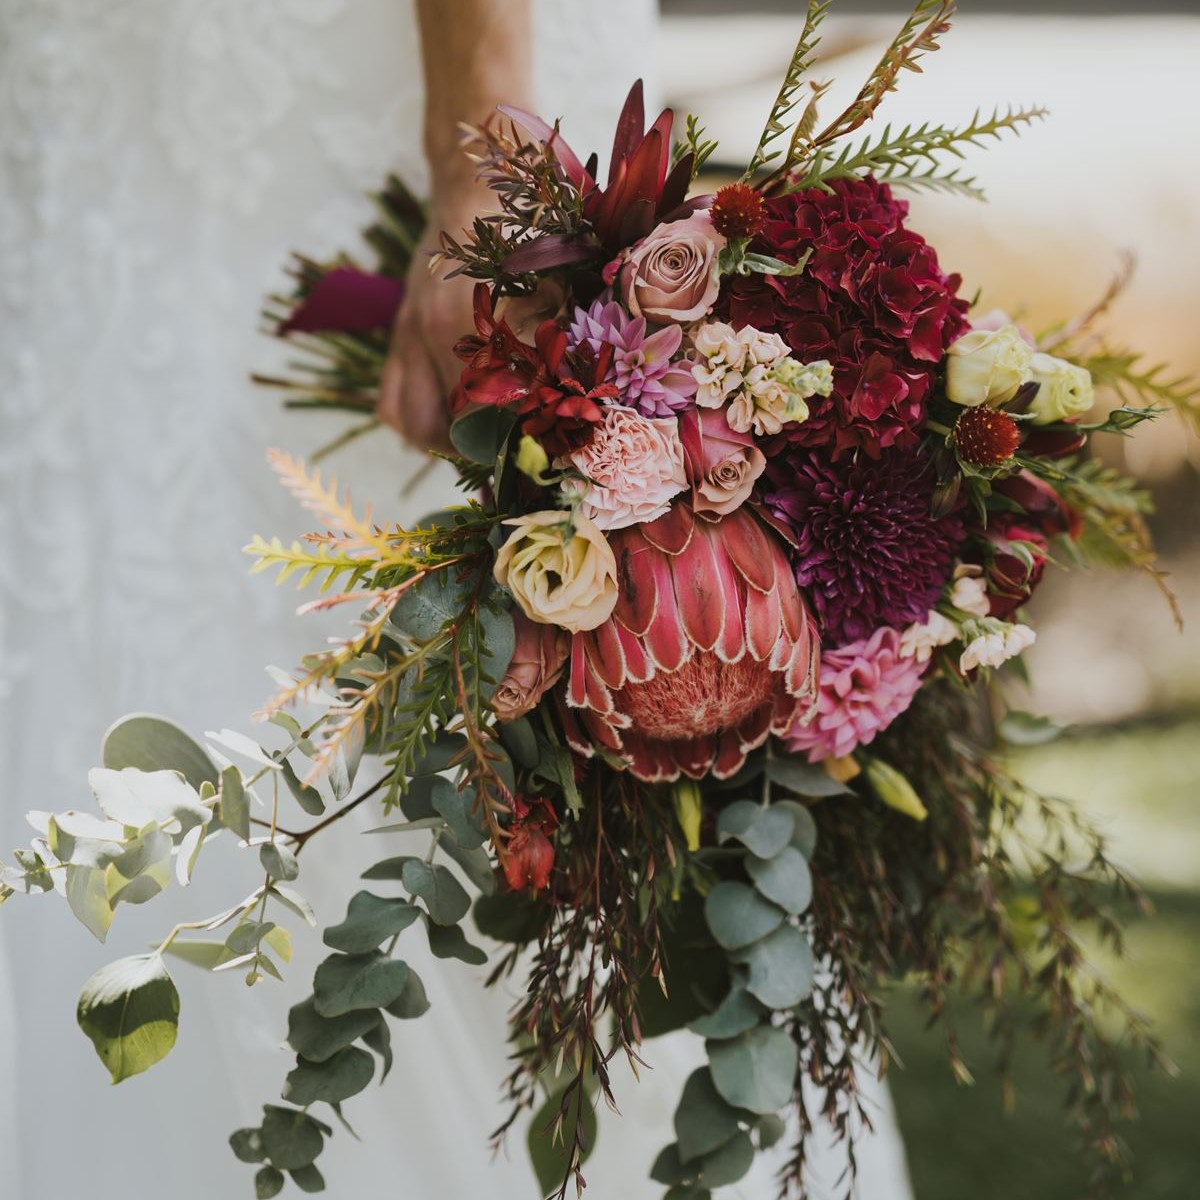 How to shop seasonally for your wedding flowers